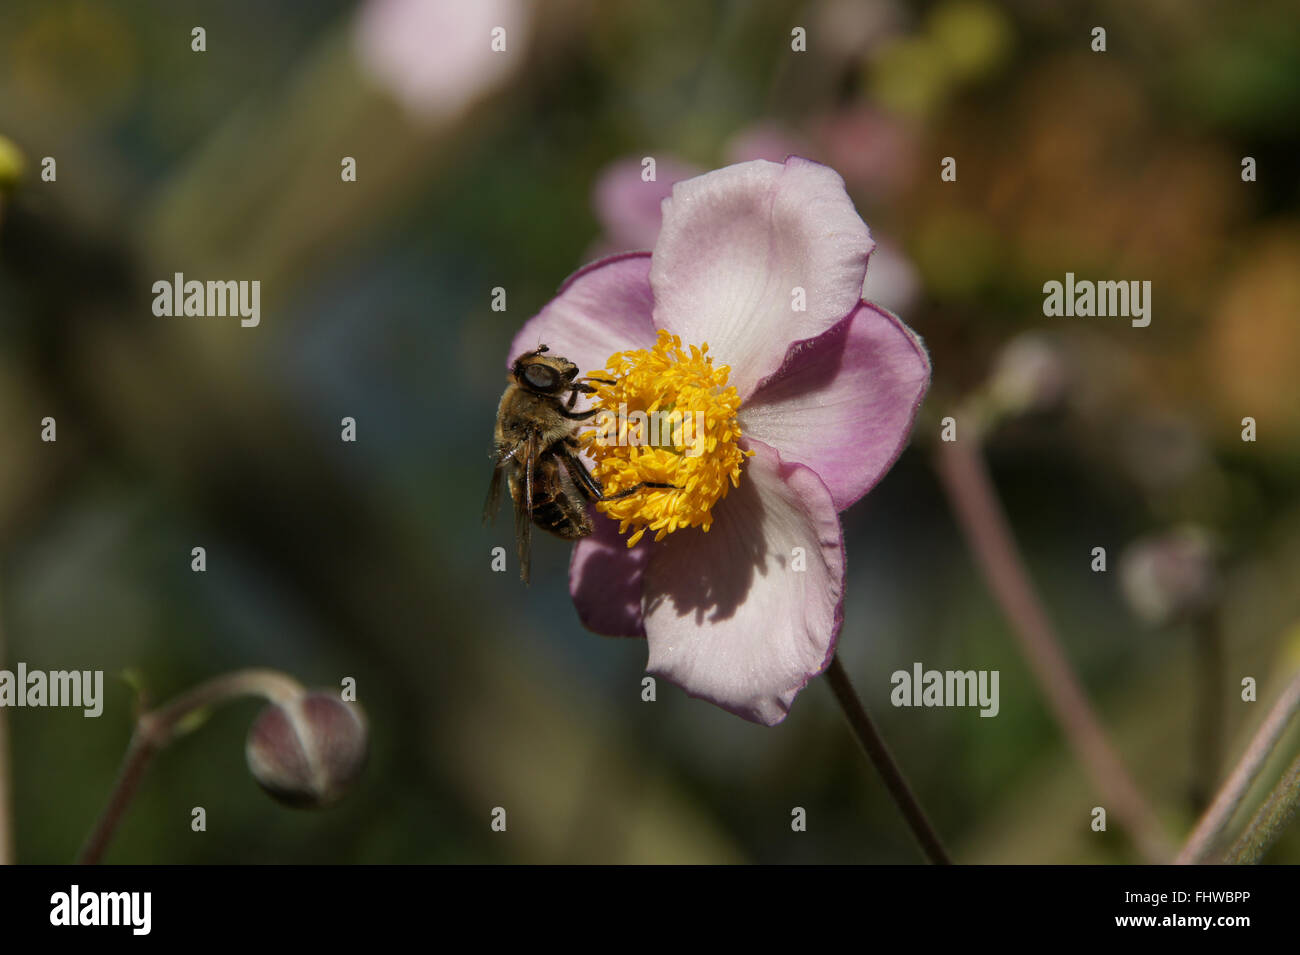 Anemone japonica, Japanese anemone, with bee Stock Photo